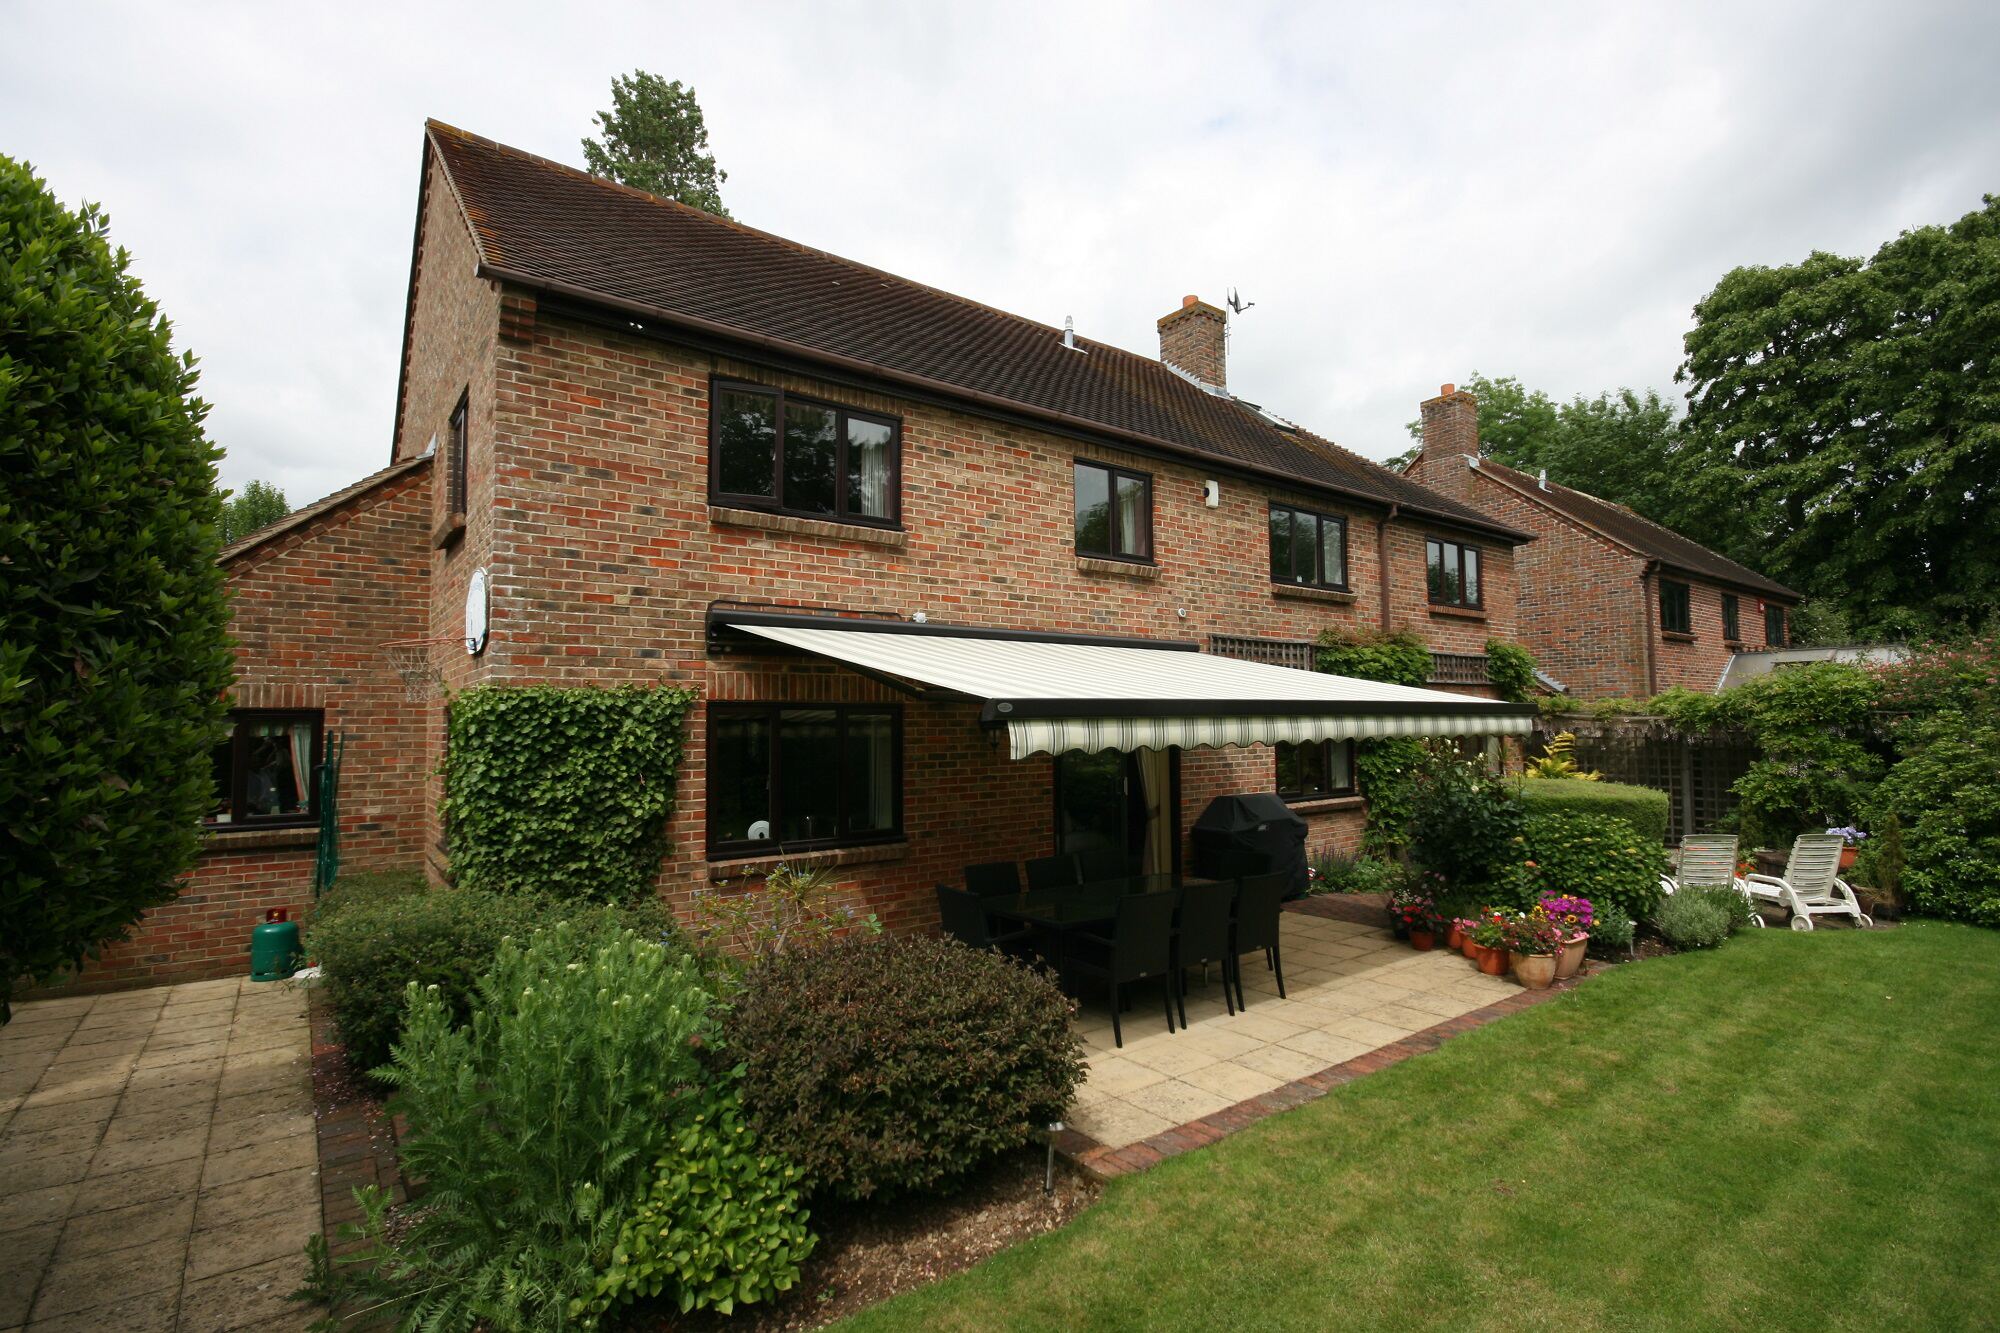 <h1>Awnings for exterior living and solar protection</h1>